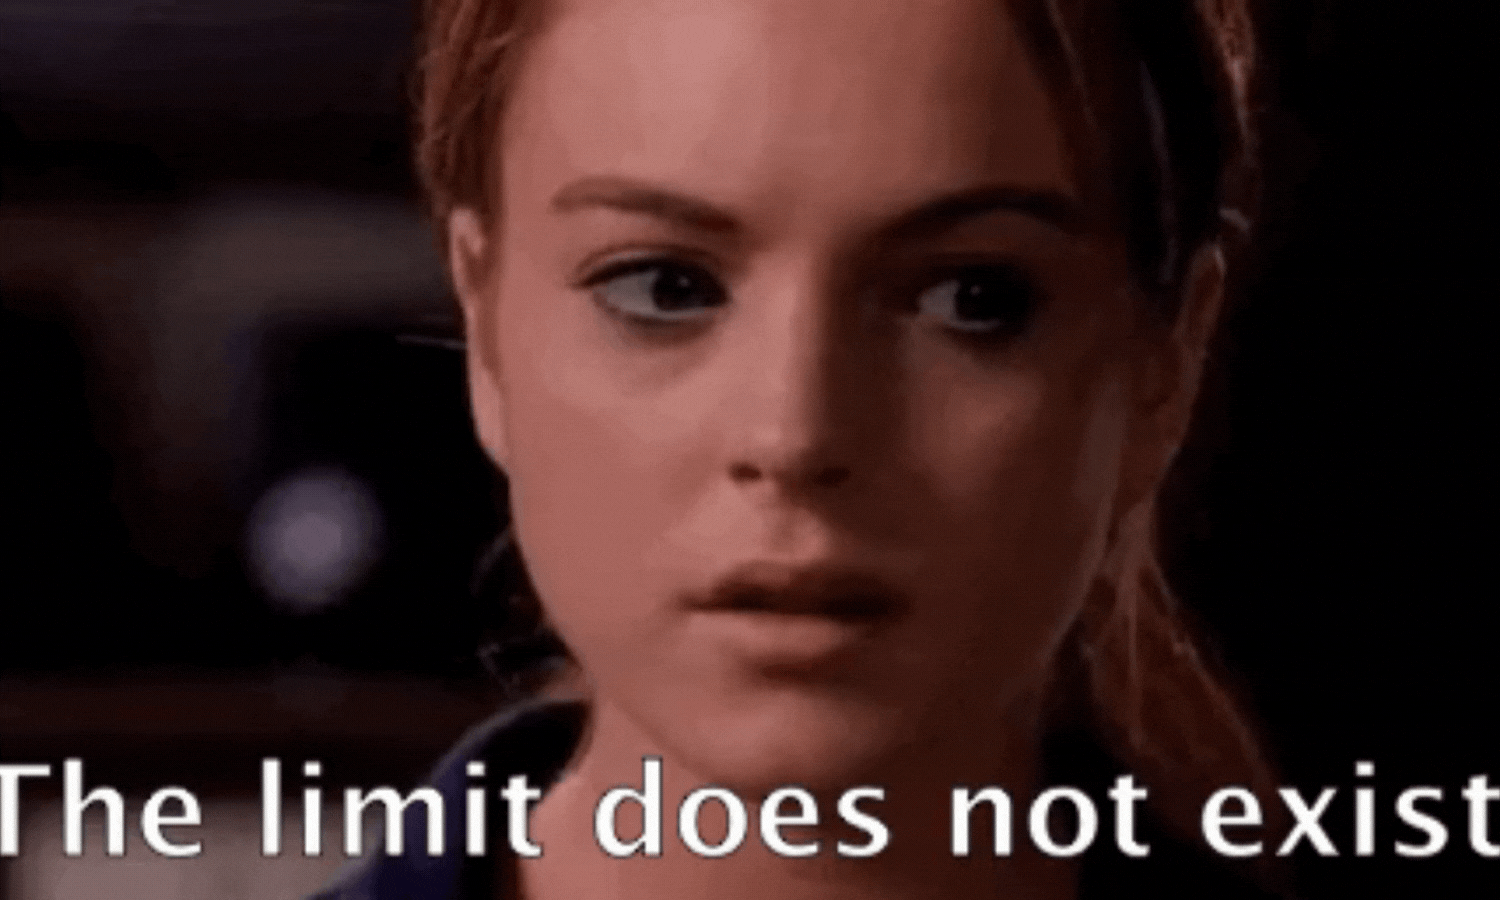 Gif of Lindsay Lohan in Mean Girls saying "the limit does not exist"